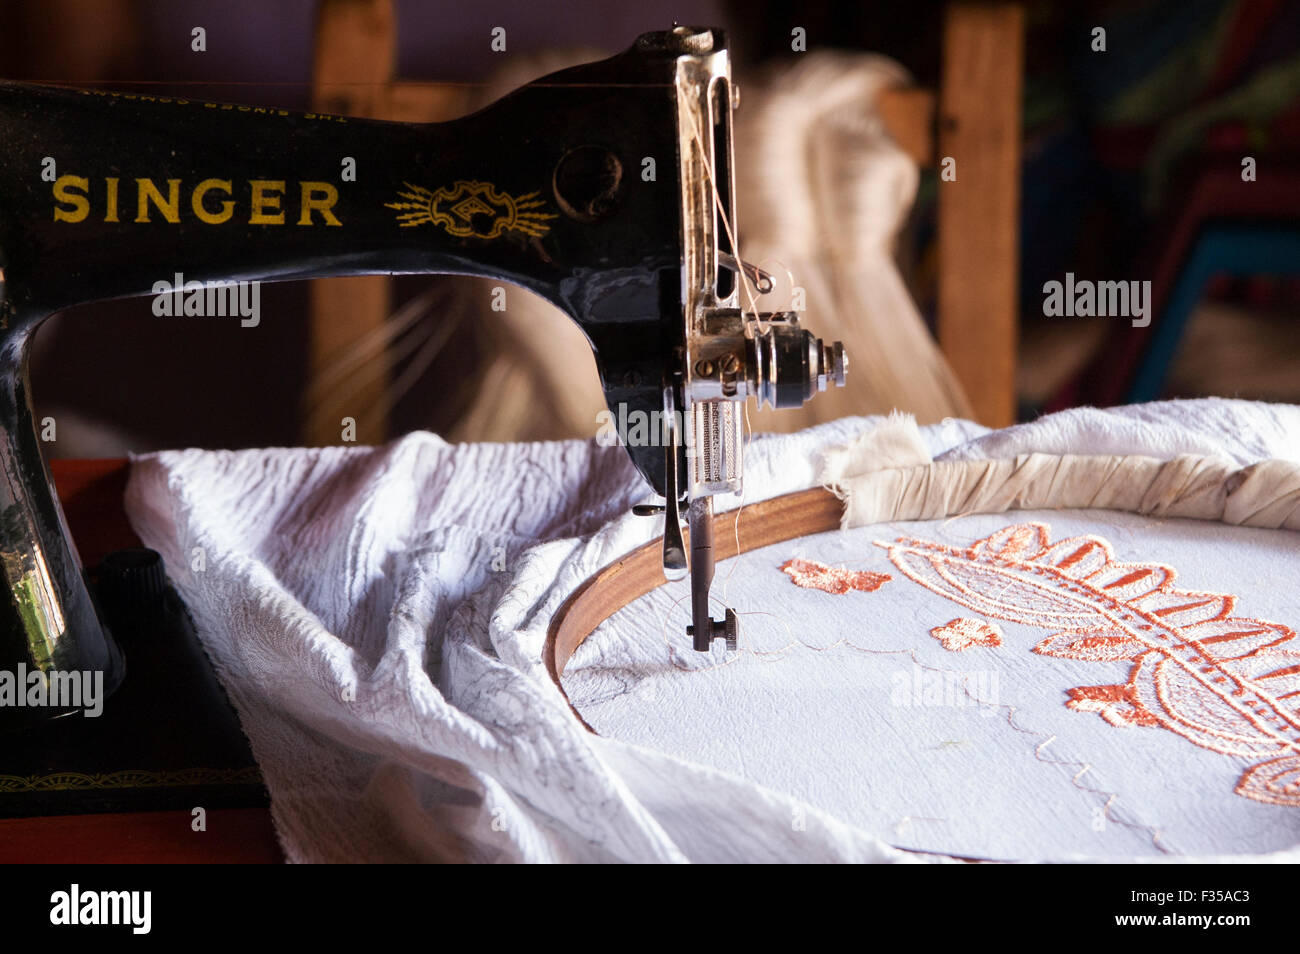 File:Singer sewing machine with a thread on top.jpg - Wikimedia Commons